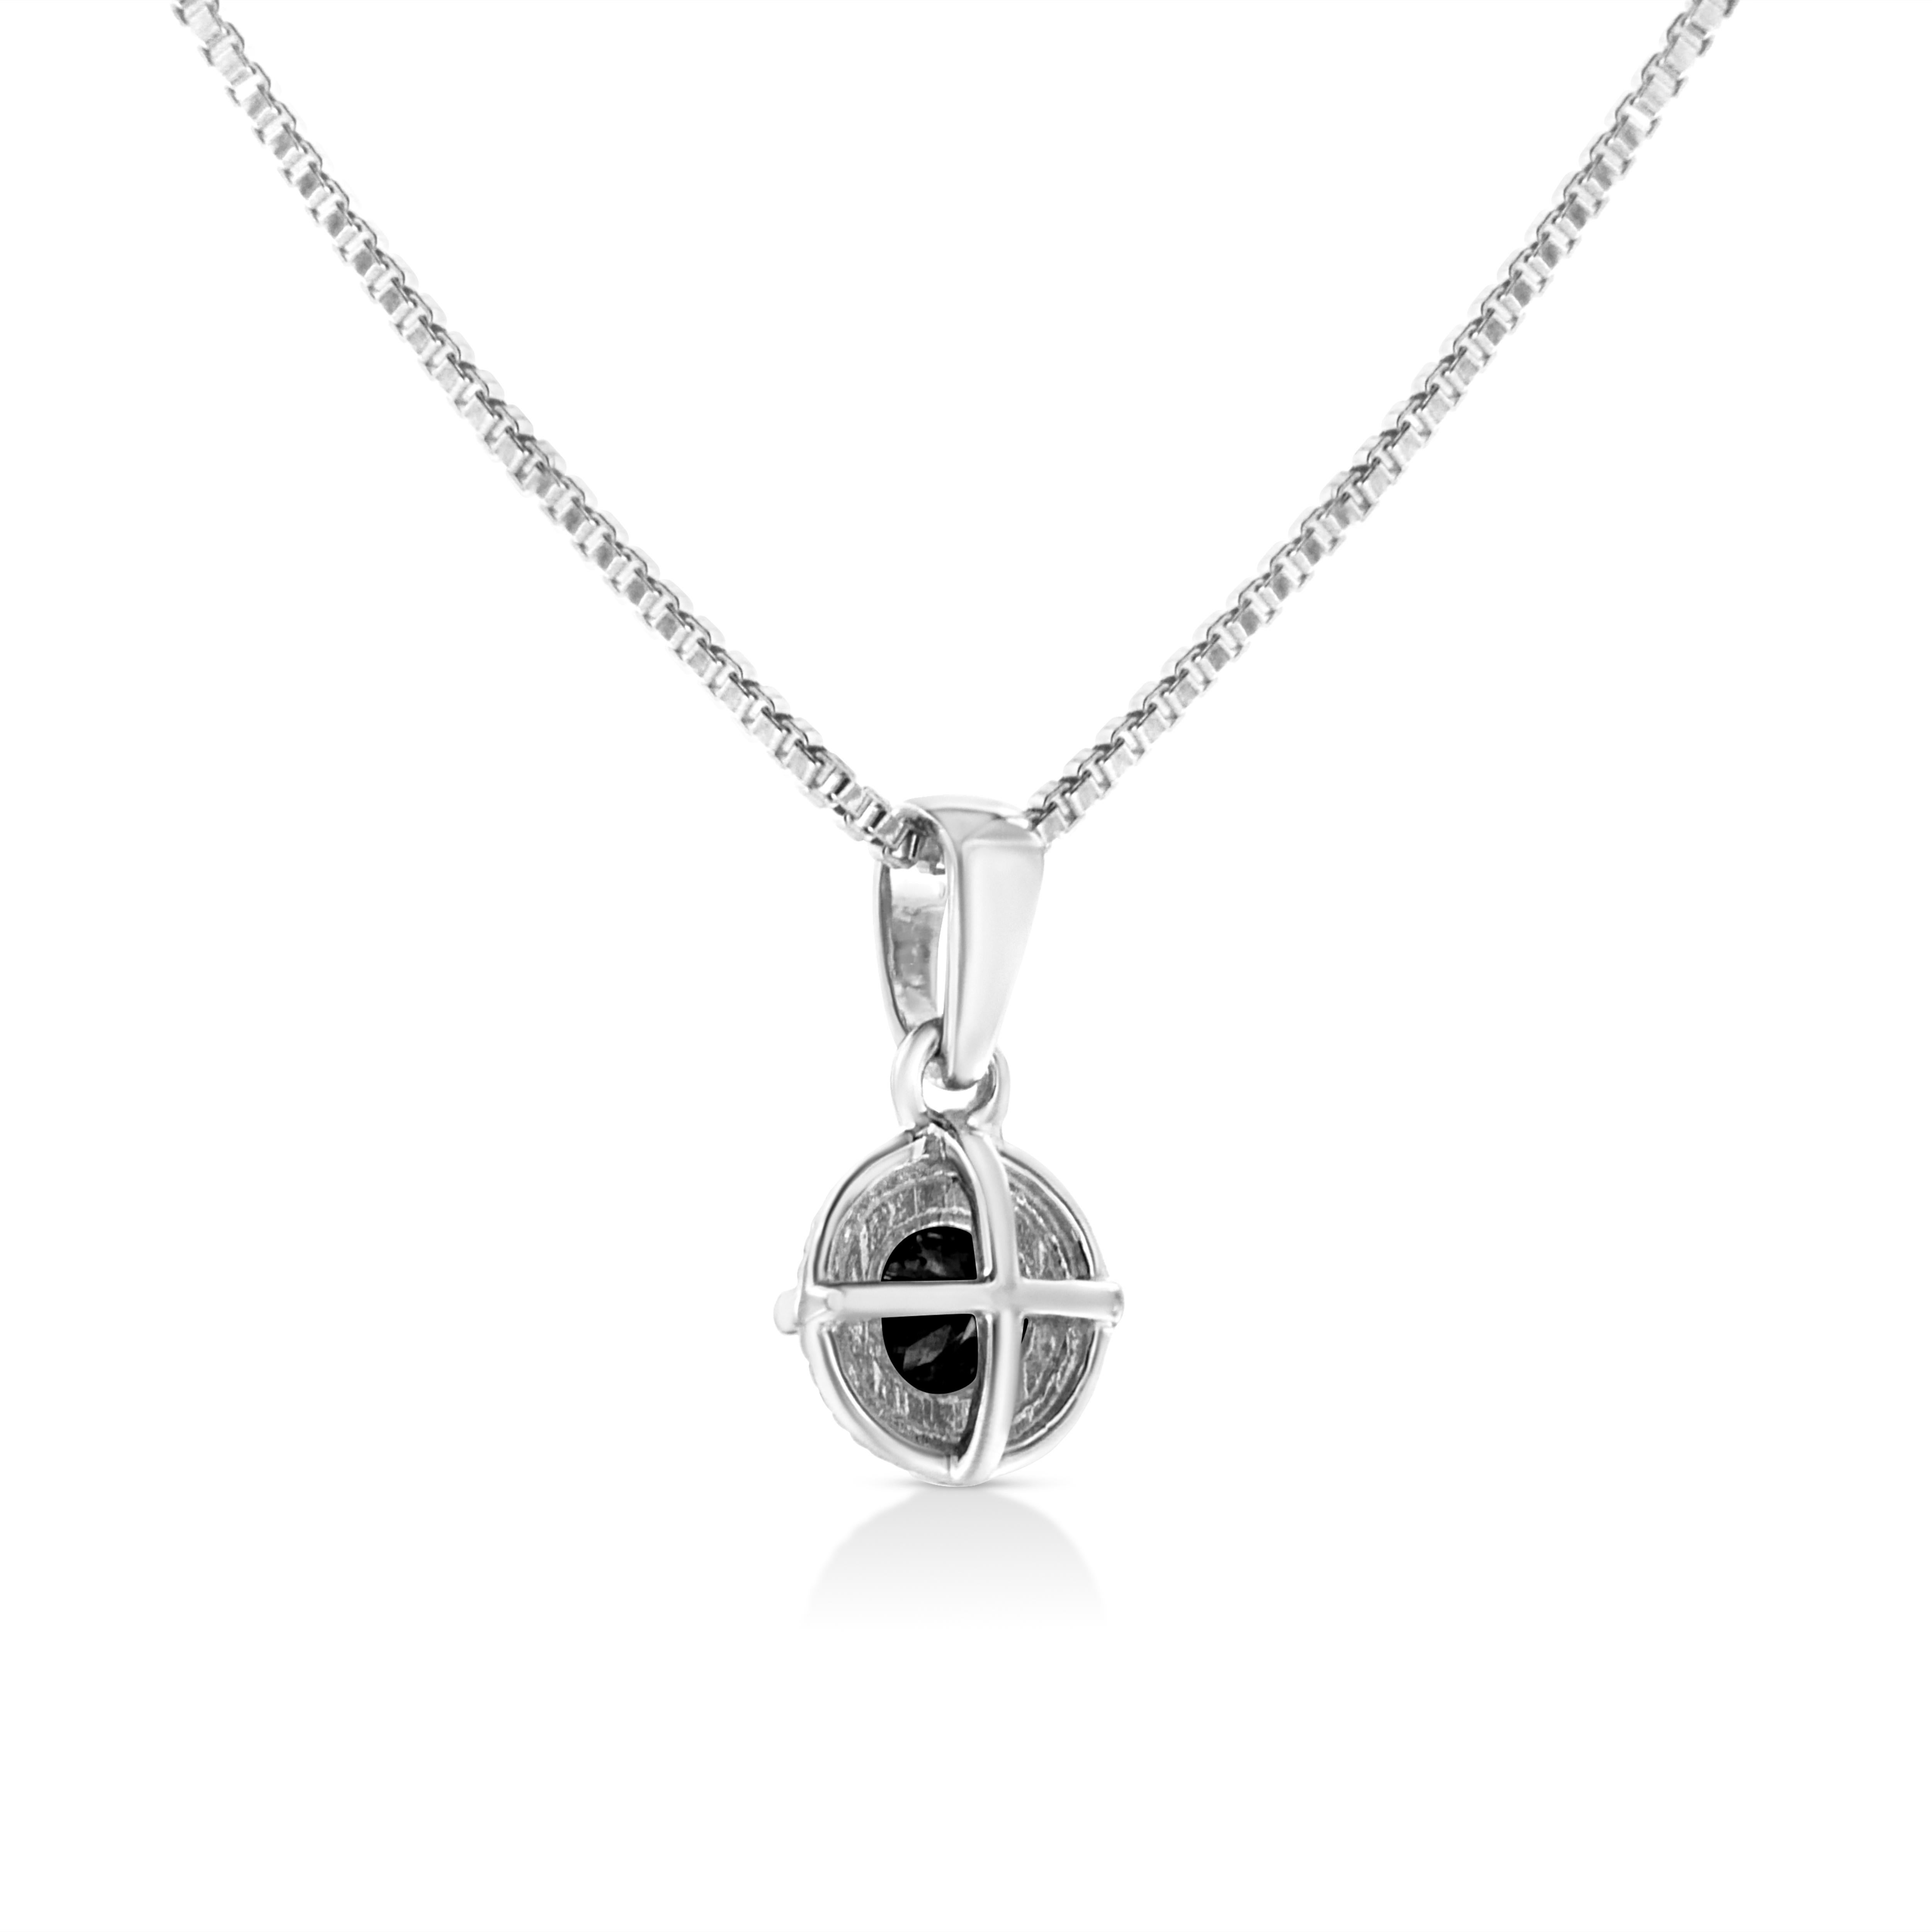 .925 Sterling Silver 1/10 Carat Treated Black Diamond Solitaire Pendant Necklace Neuf - En vente à New York, NY